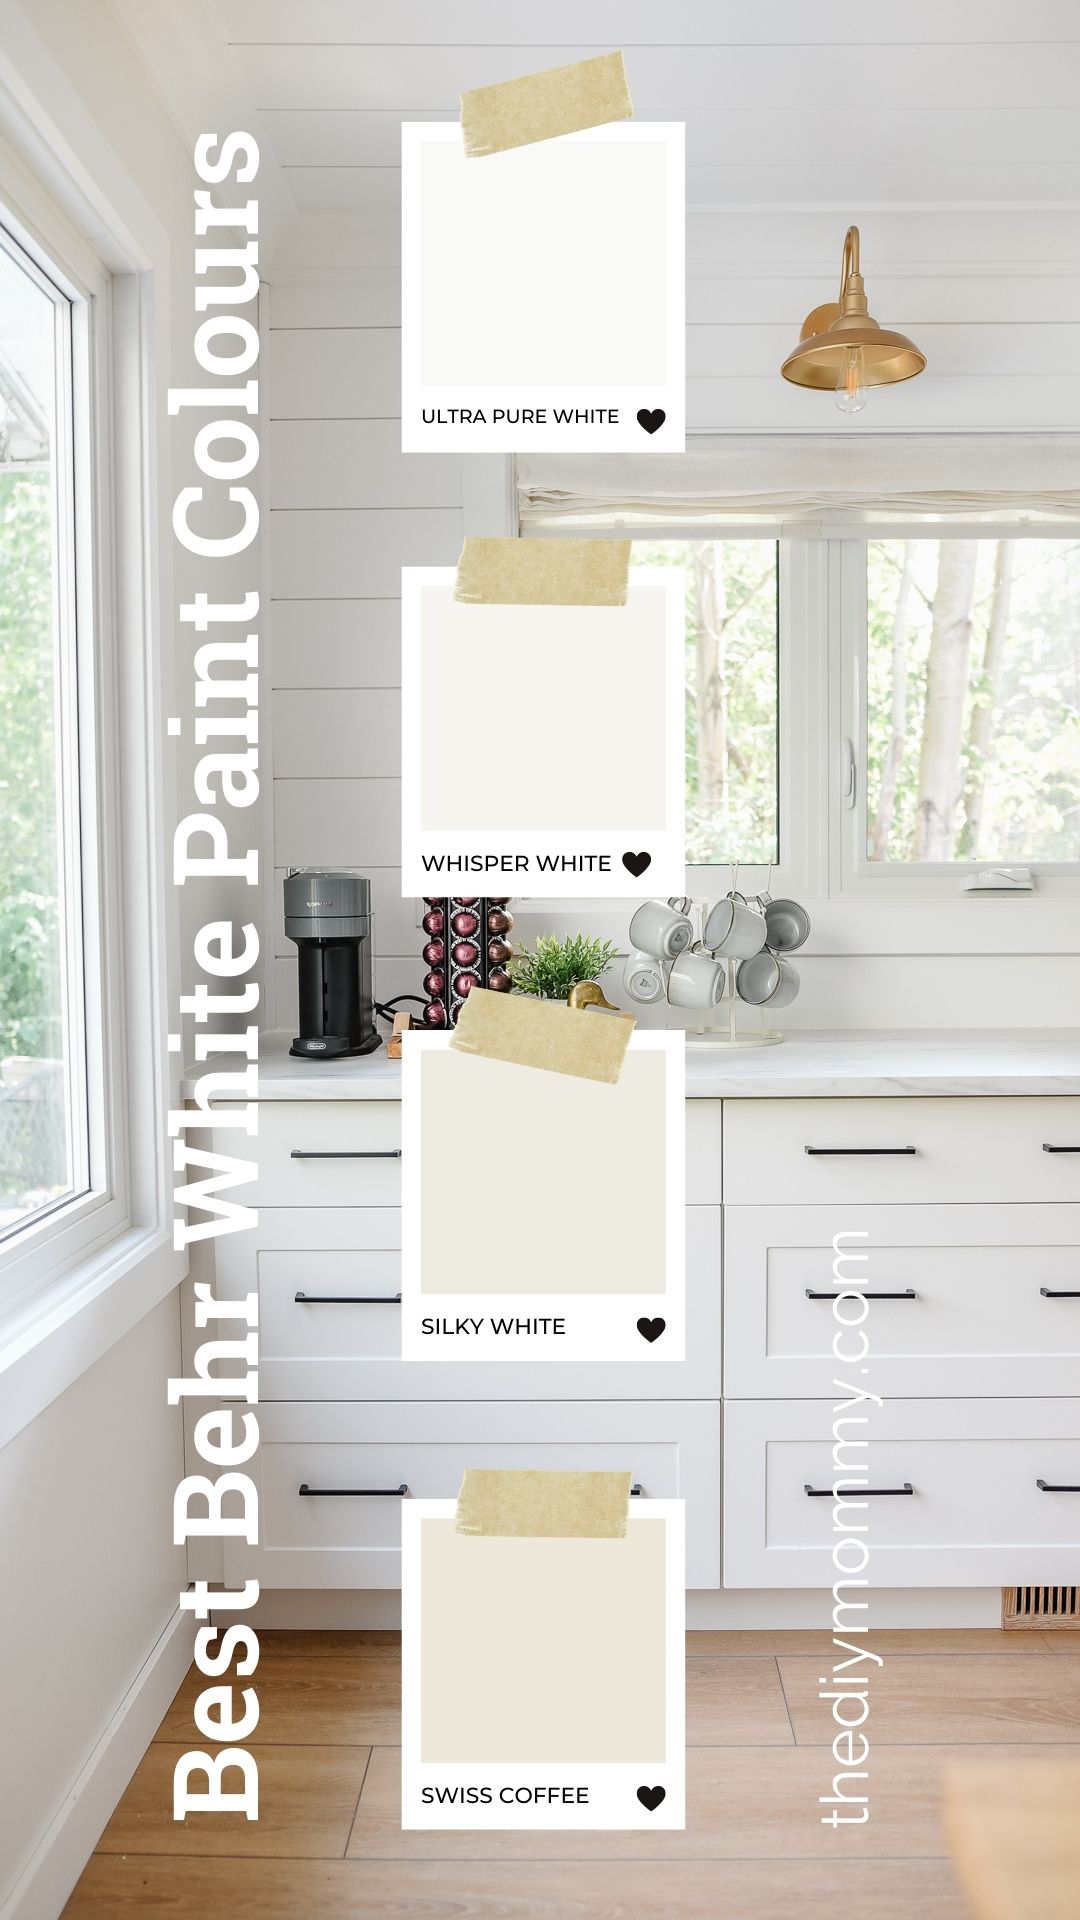 Best Behr White Paint - how to choose!